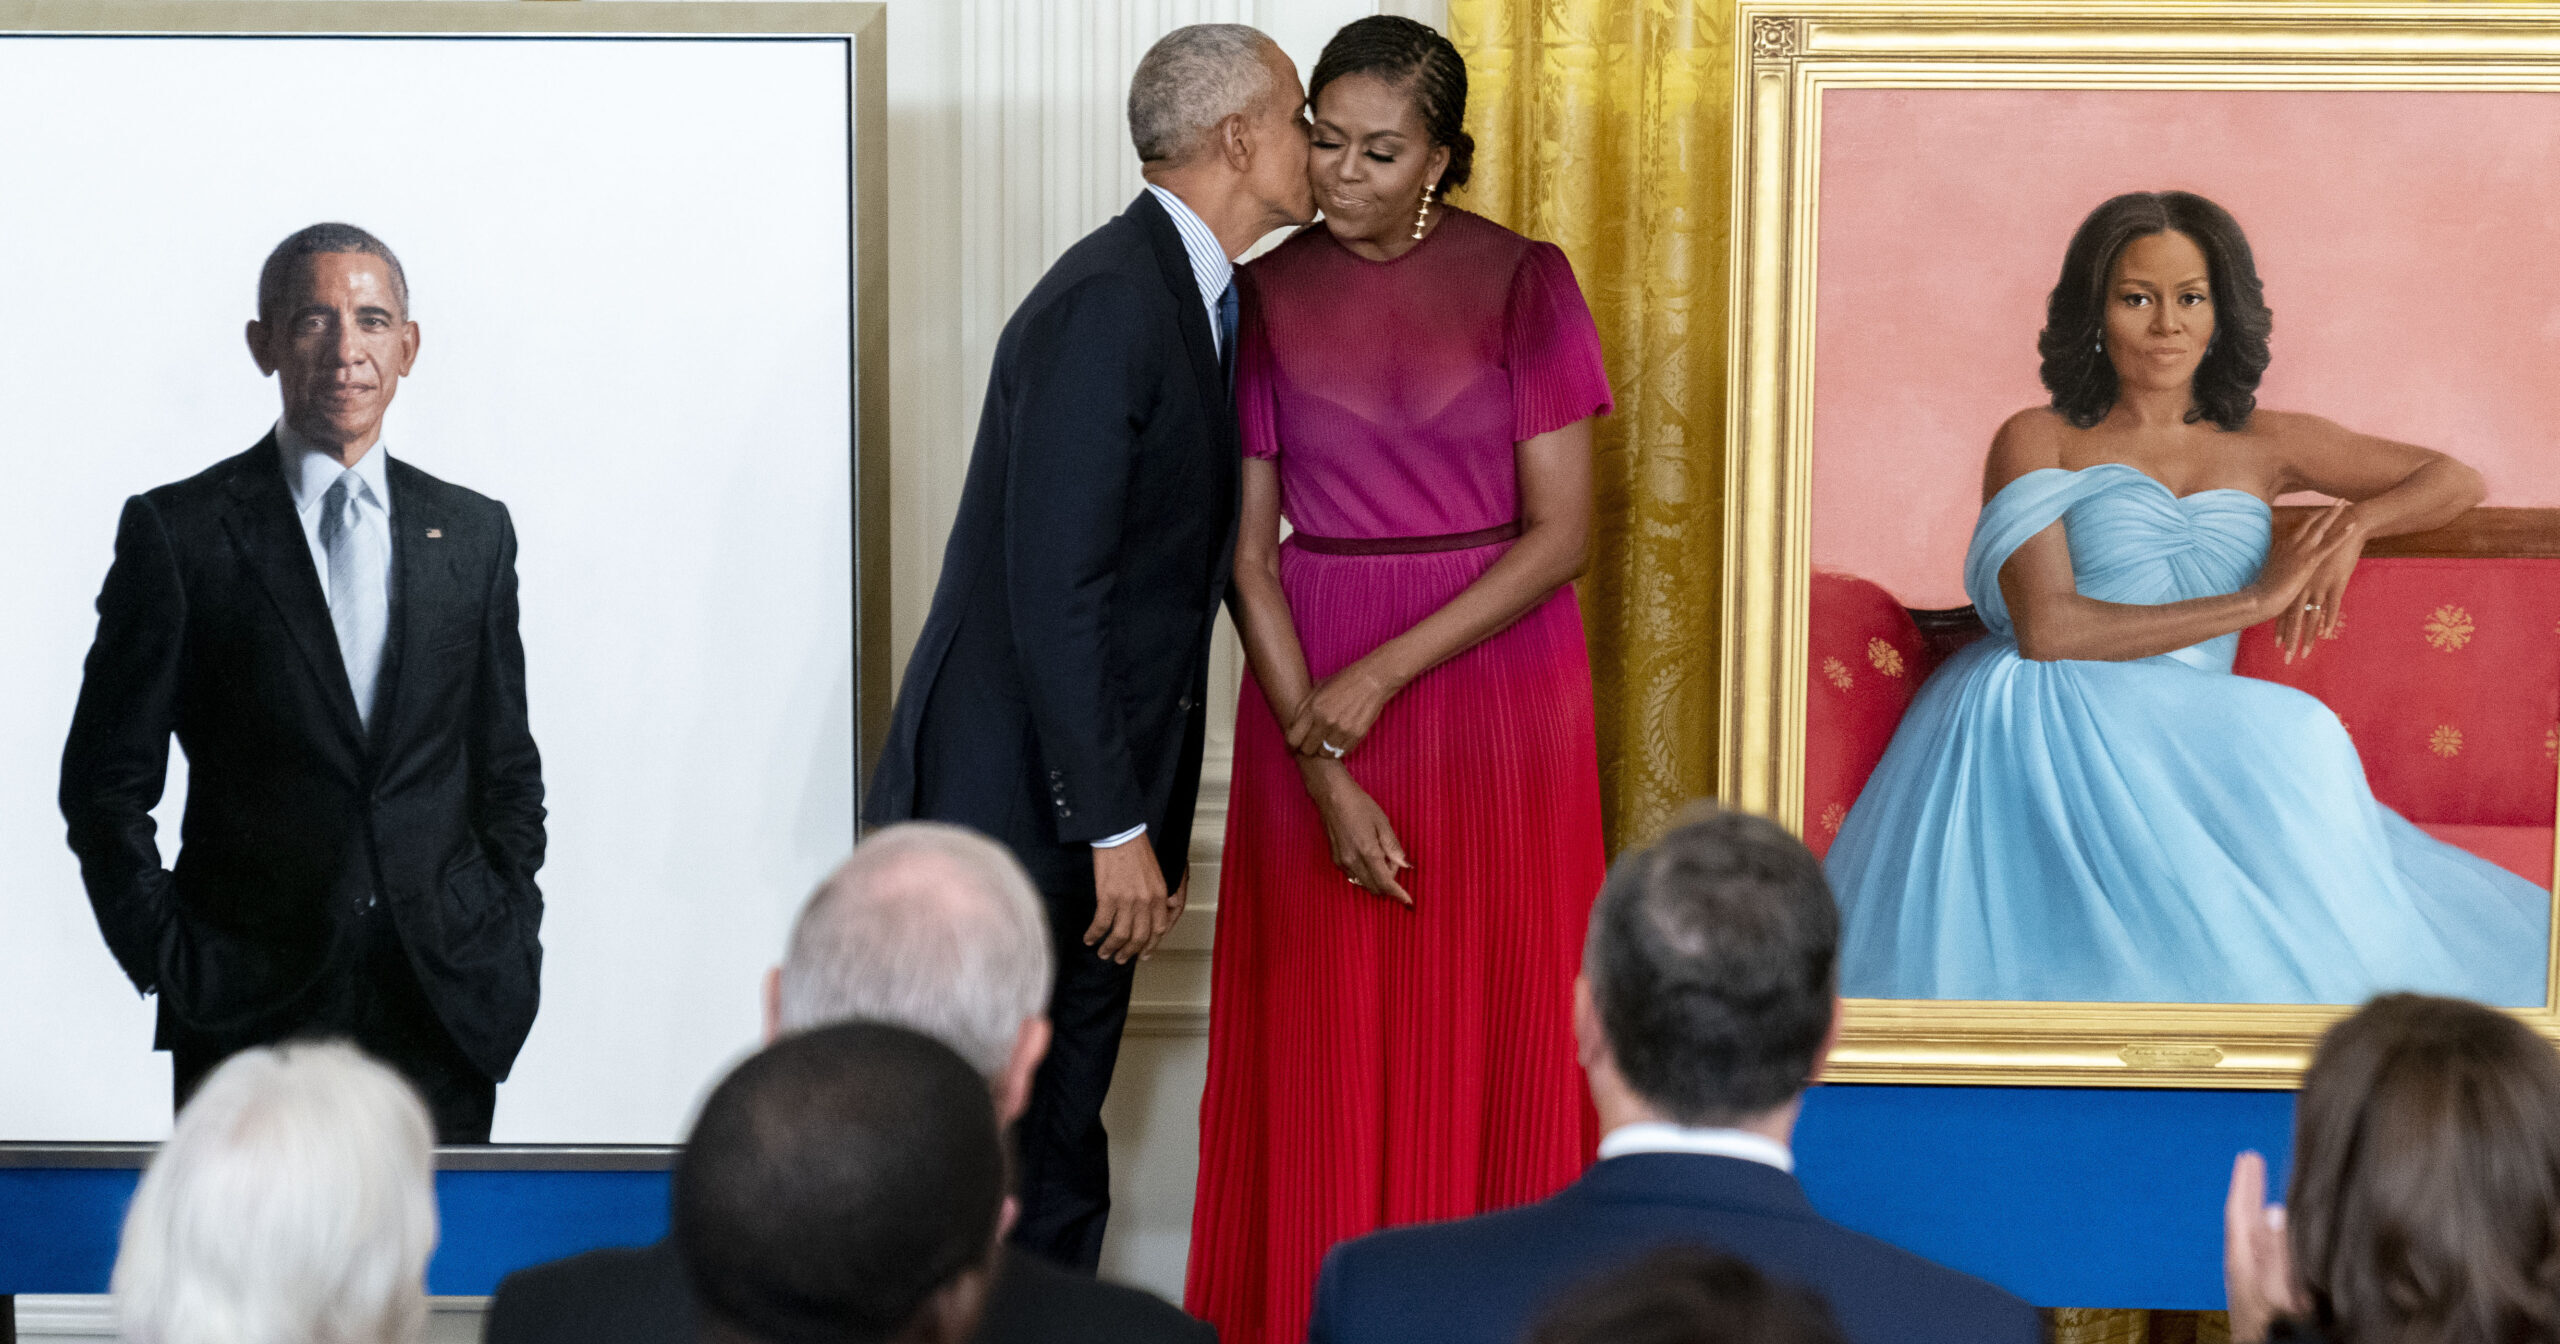 Former President Barack Obama kisses his wife former first lady Michelle Obama after they unveiled their official White House portraits during a ceremony in the East Room of the White House, Wednesday, Sept. 7, 2022, in Washington. (AP Photo/Andrew Harnik)